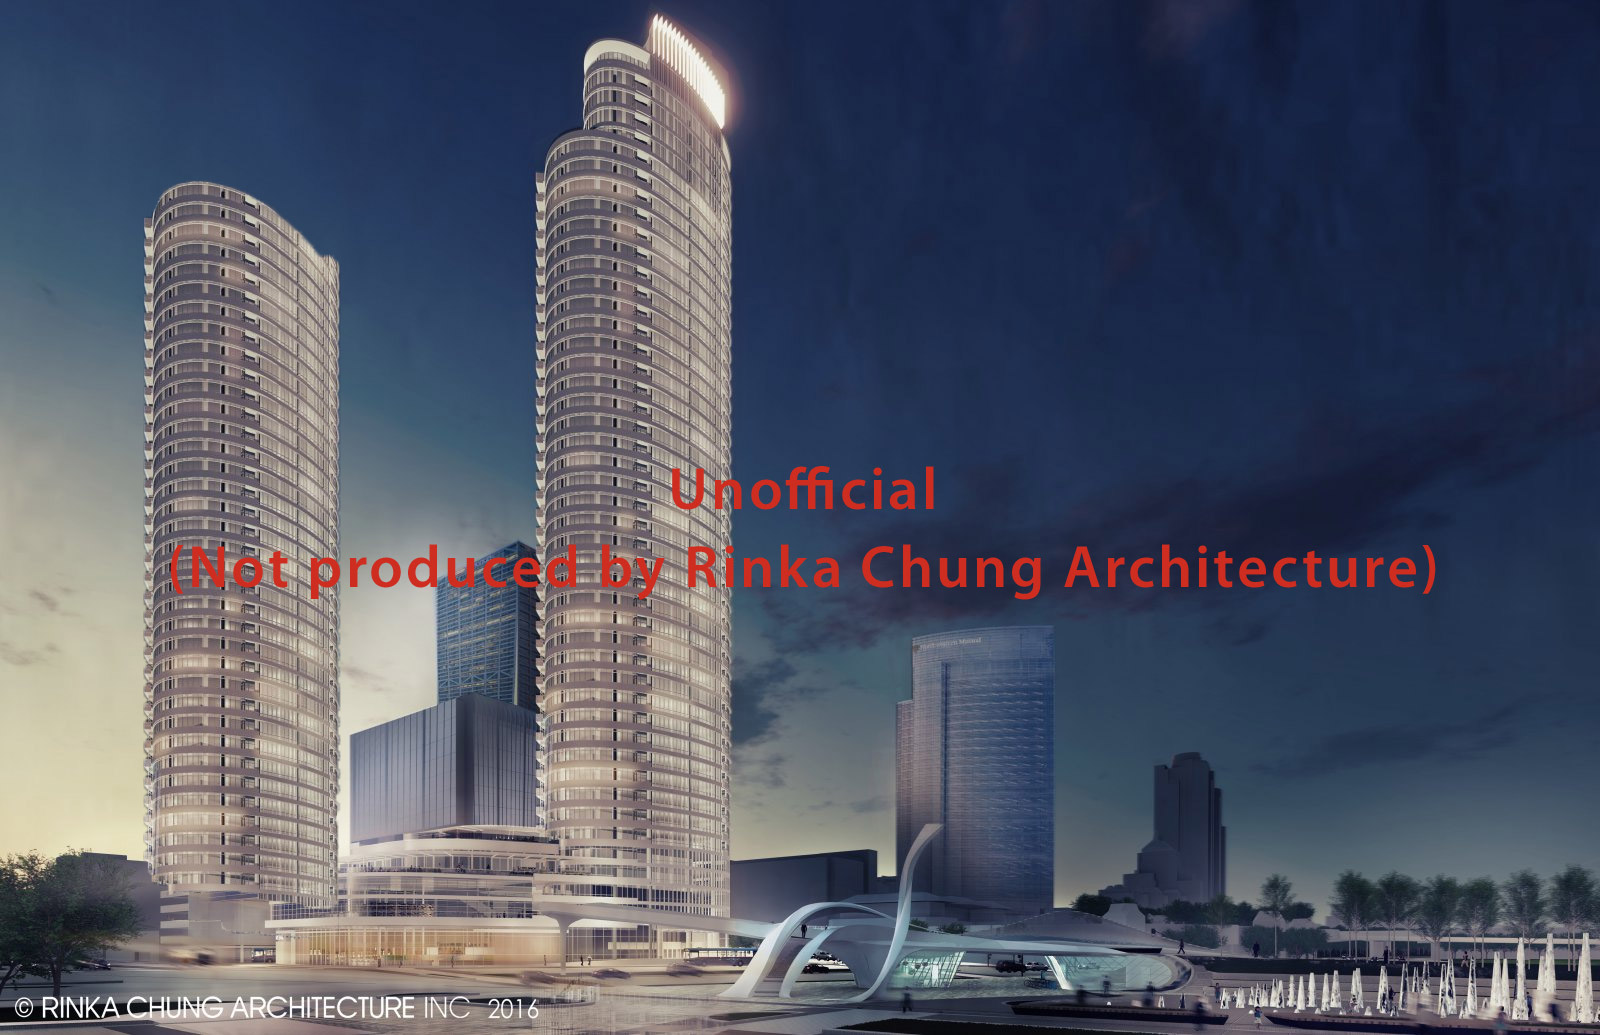 Potential Second Tower at The Couture (Urban Milwaukee made image from rendering by Rinka Chung Architecture)